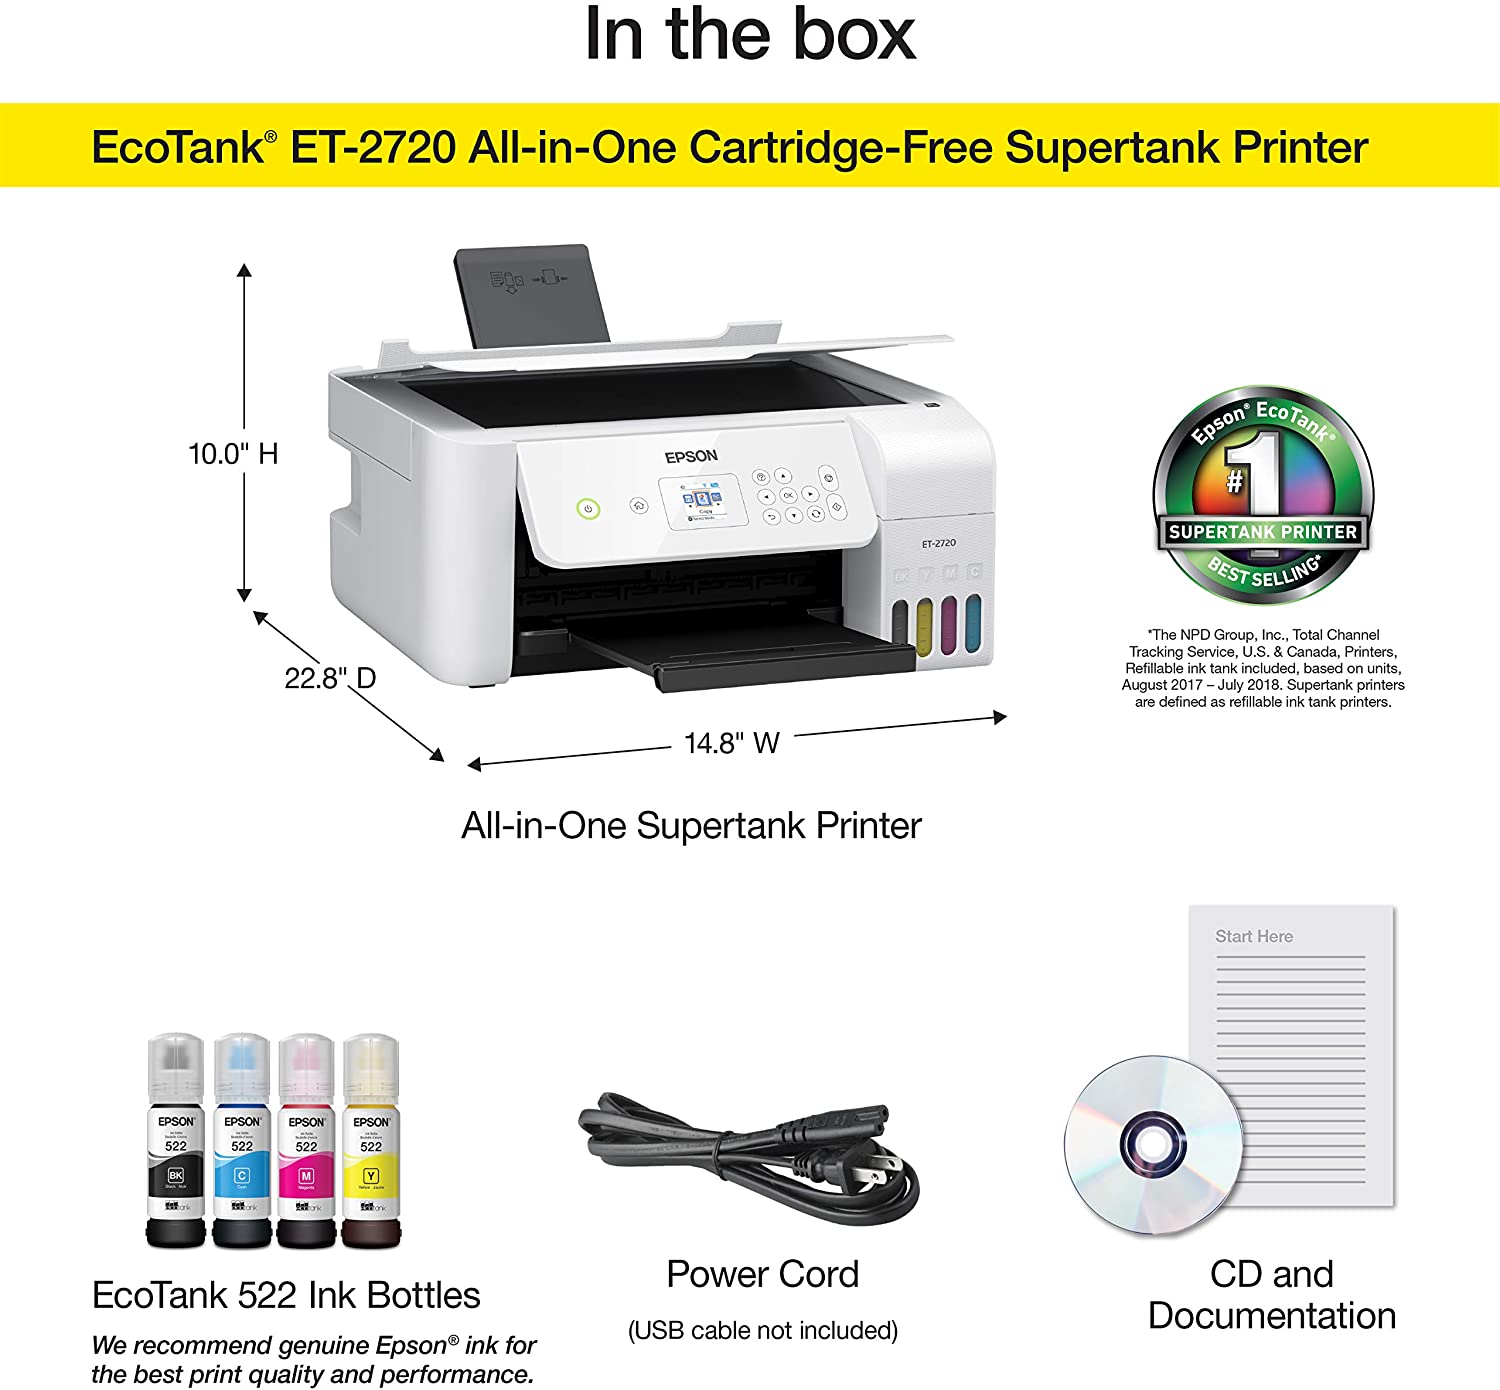 Epson EcoTank ET-2720 Wireless All-in-One Color Supertank Printer - White - image 1 of 6